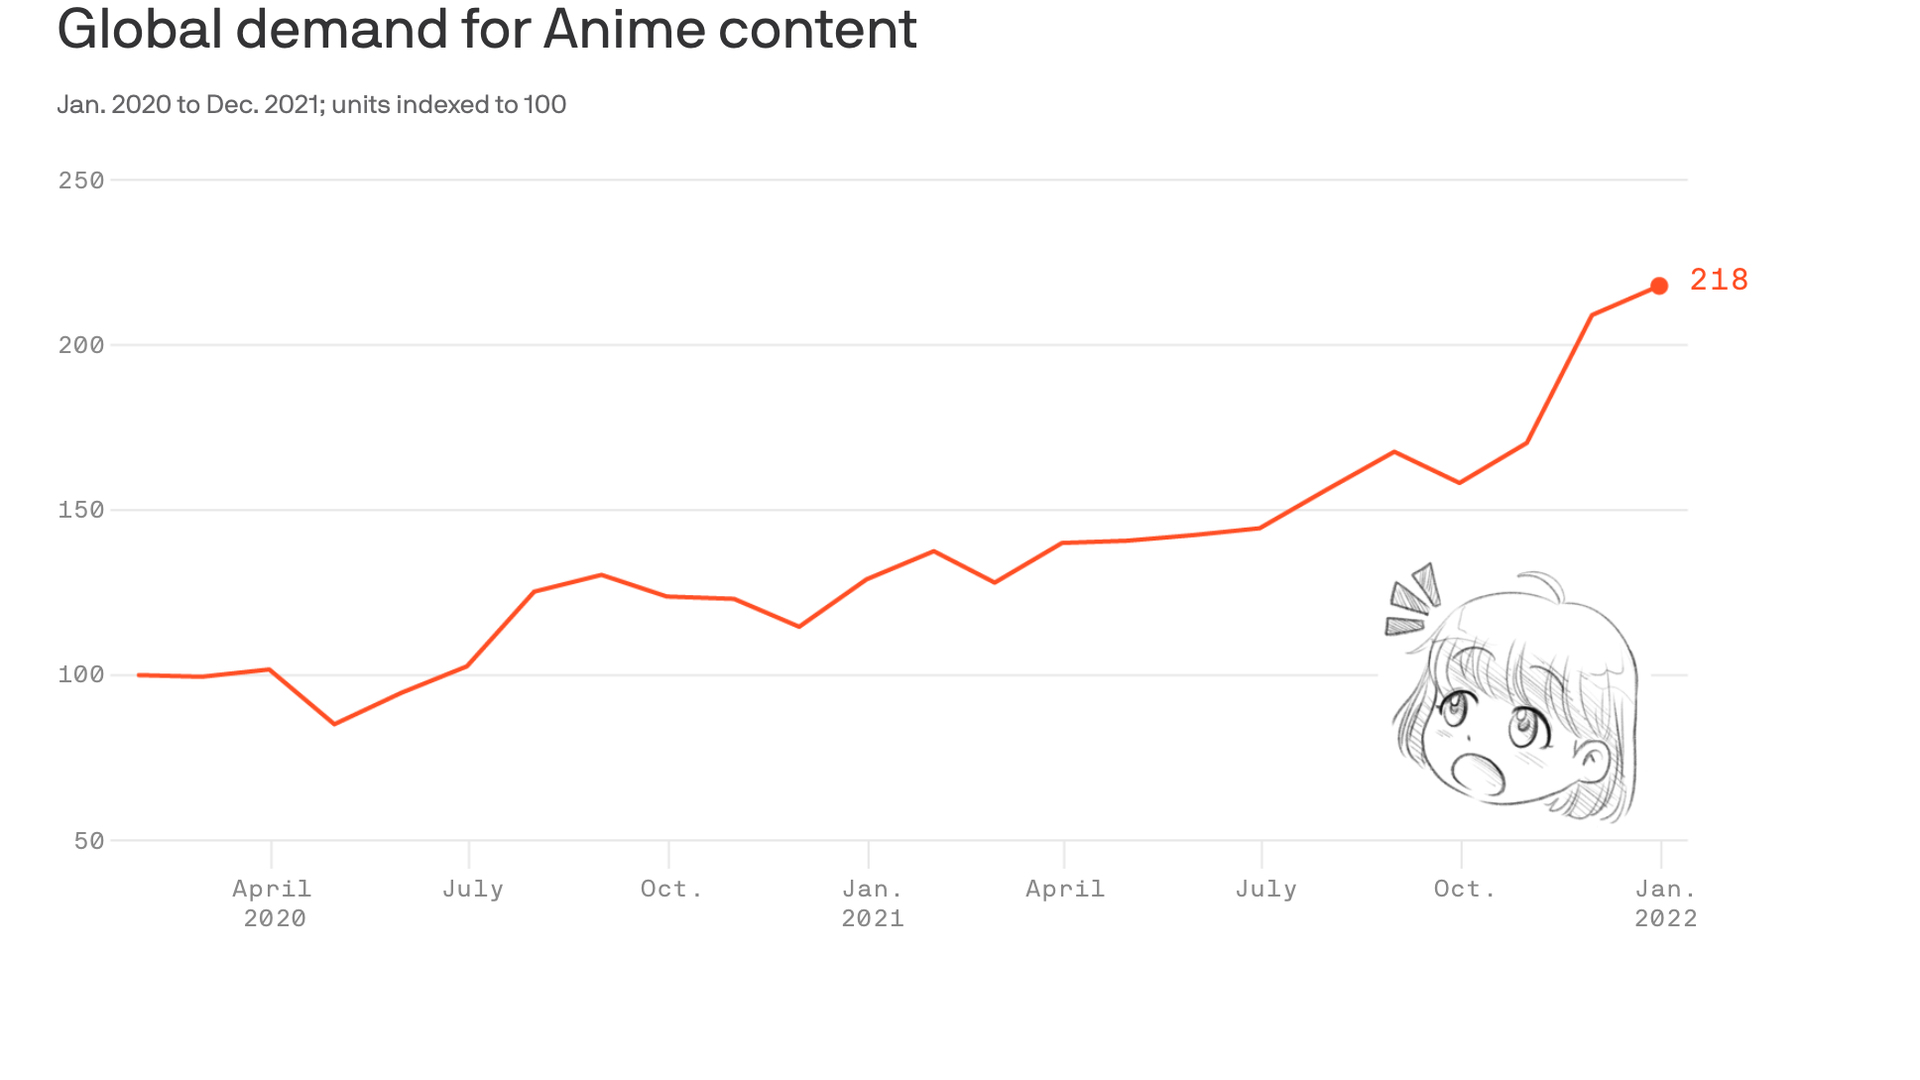 Crunchyroll merge with Funimation: How did it affect the Anime market?